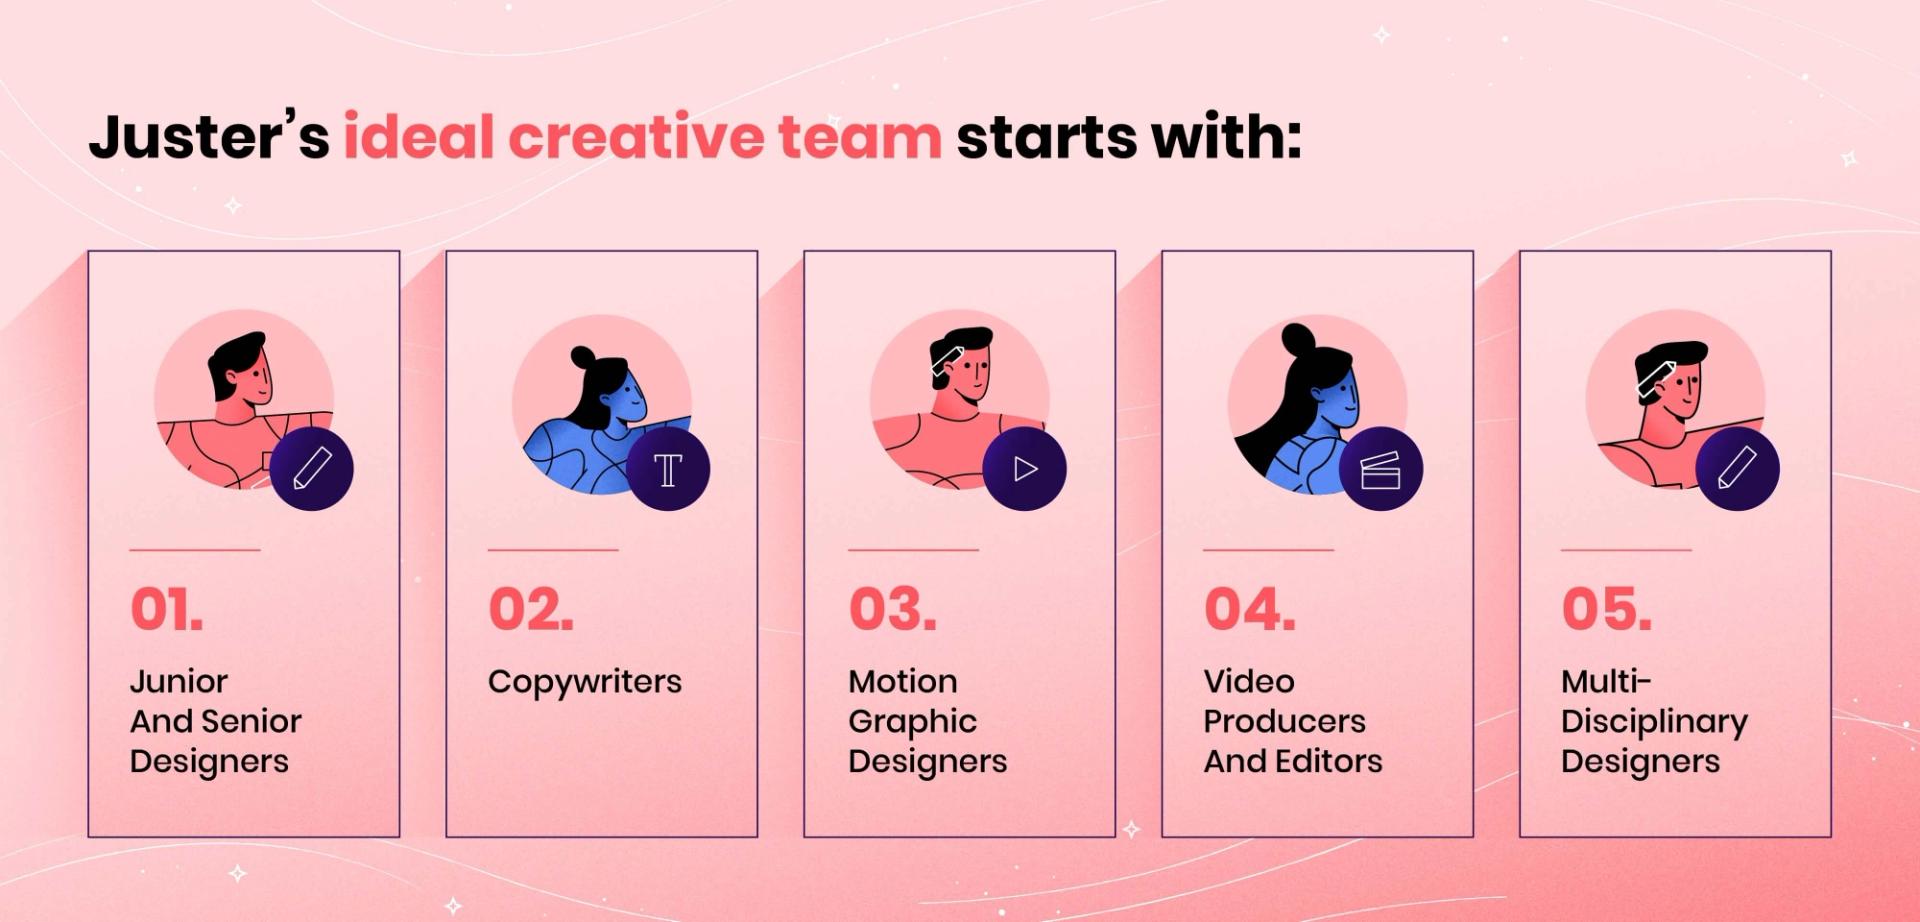 Juster's ideal creative team